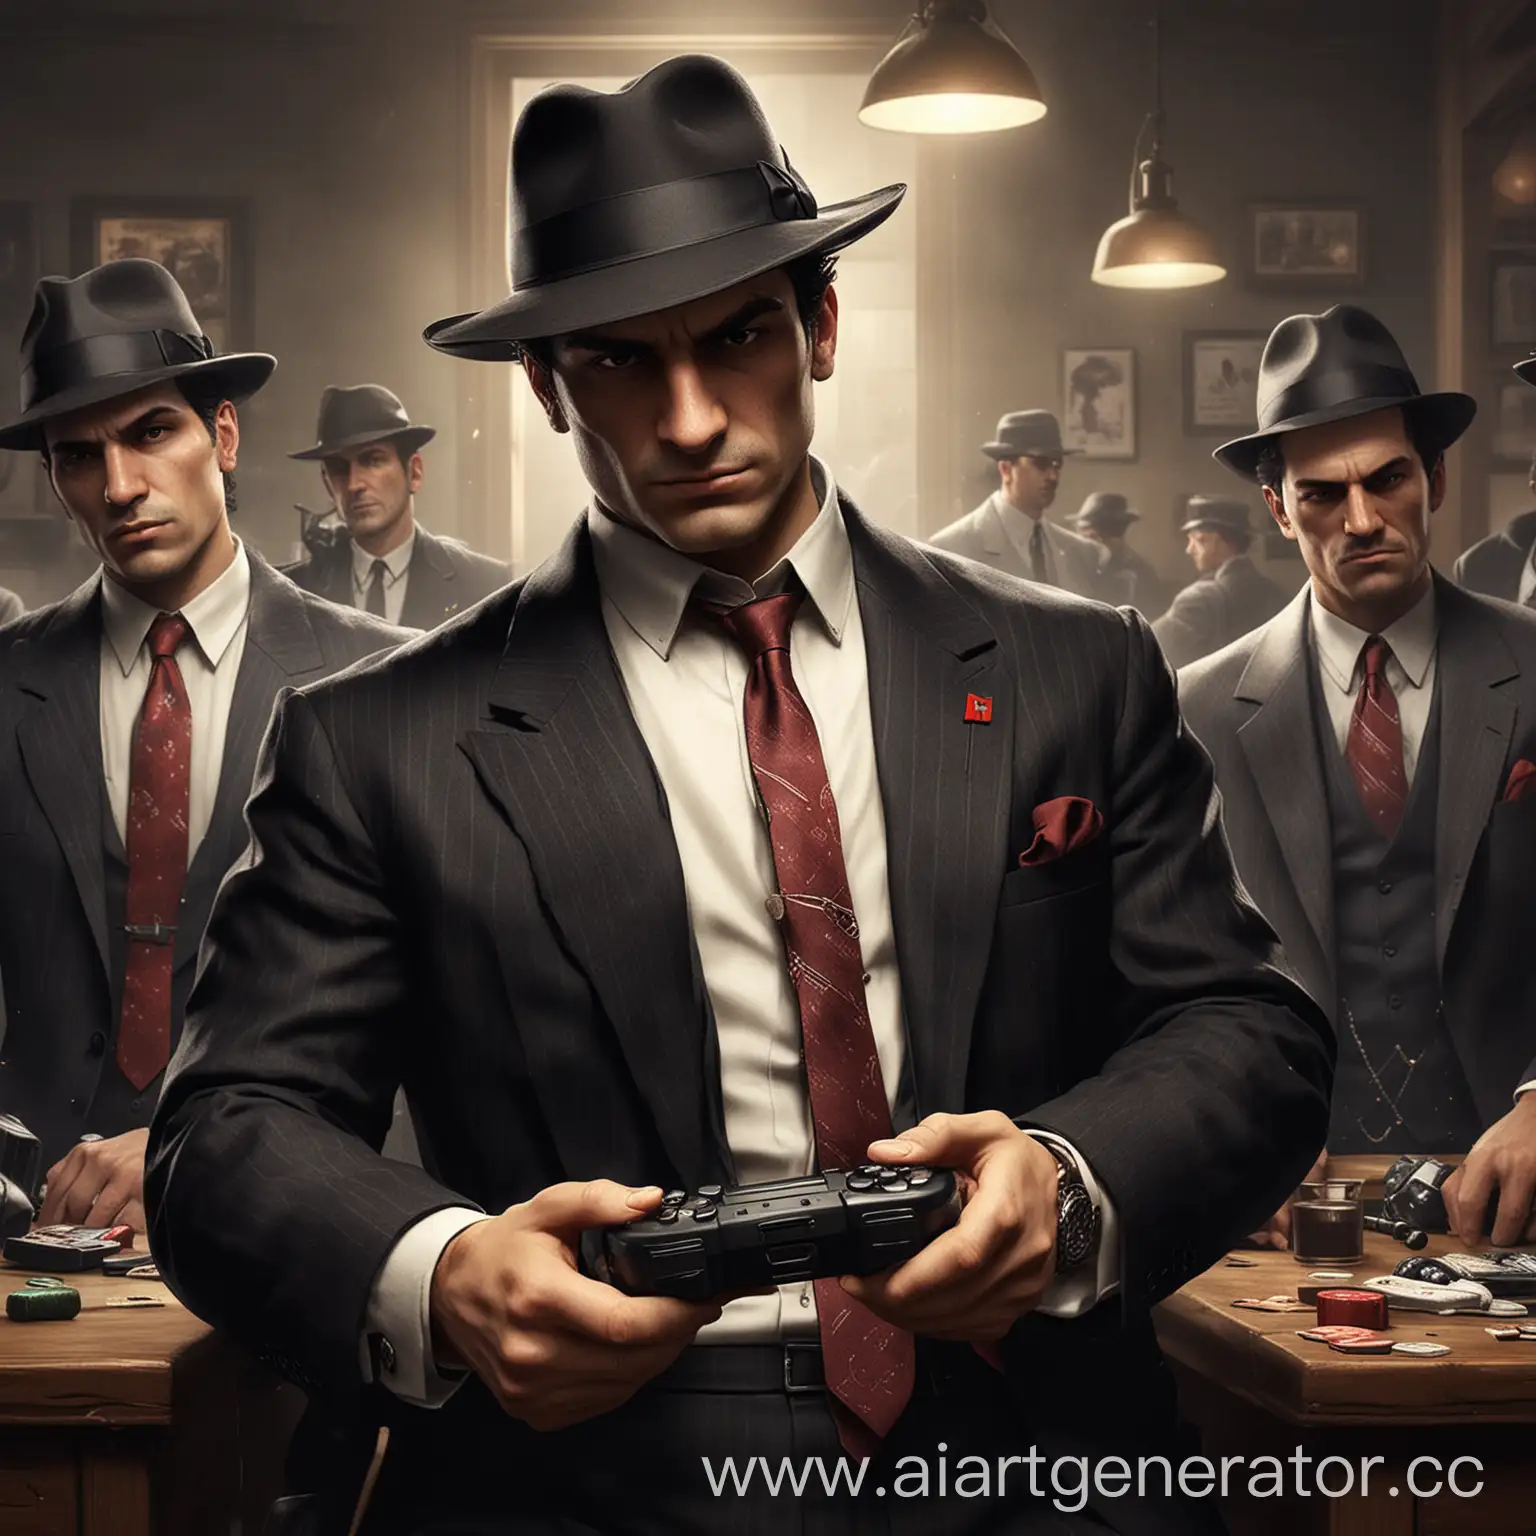 Mafia-Members-Engage-in-Video-Game-Competition